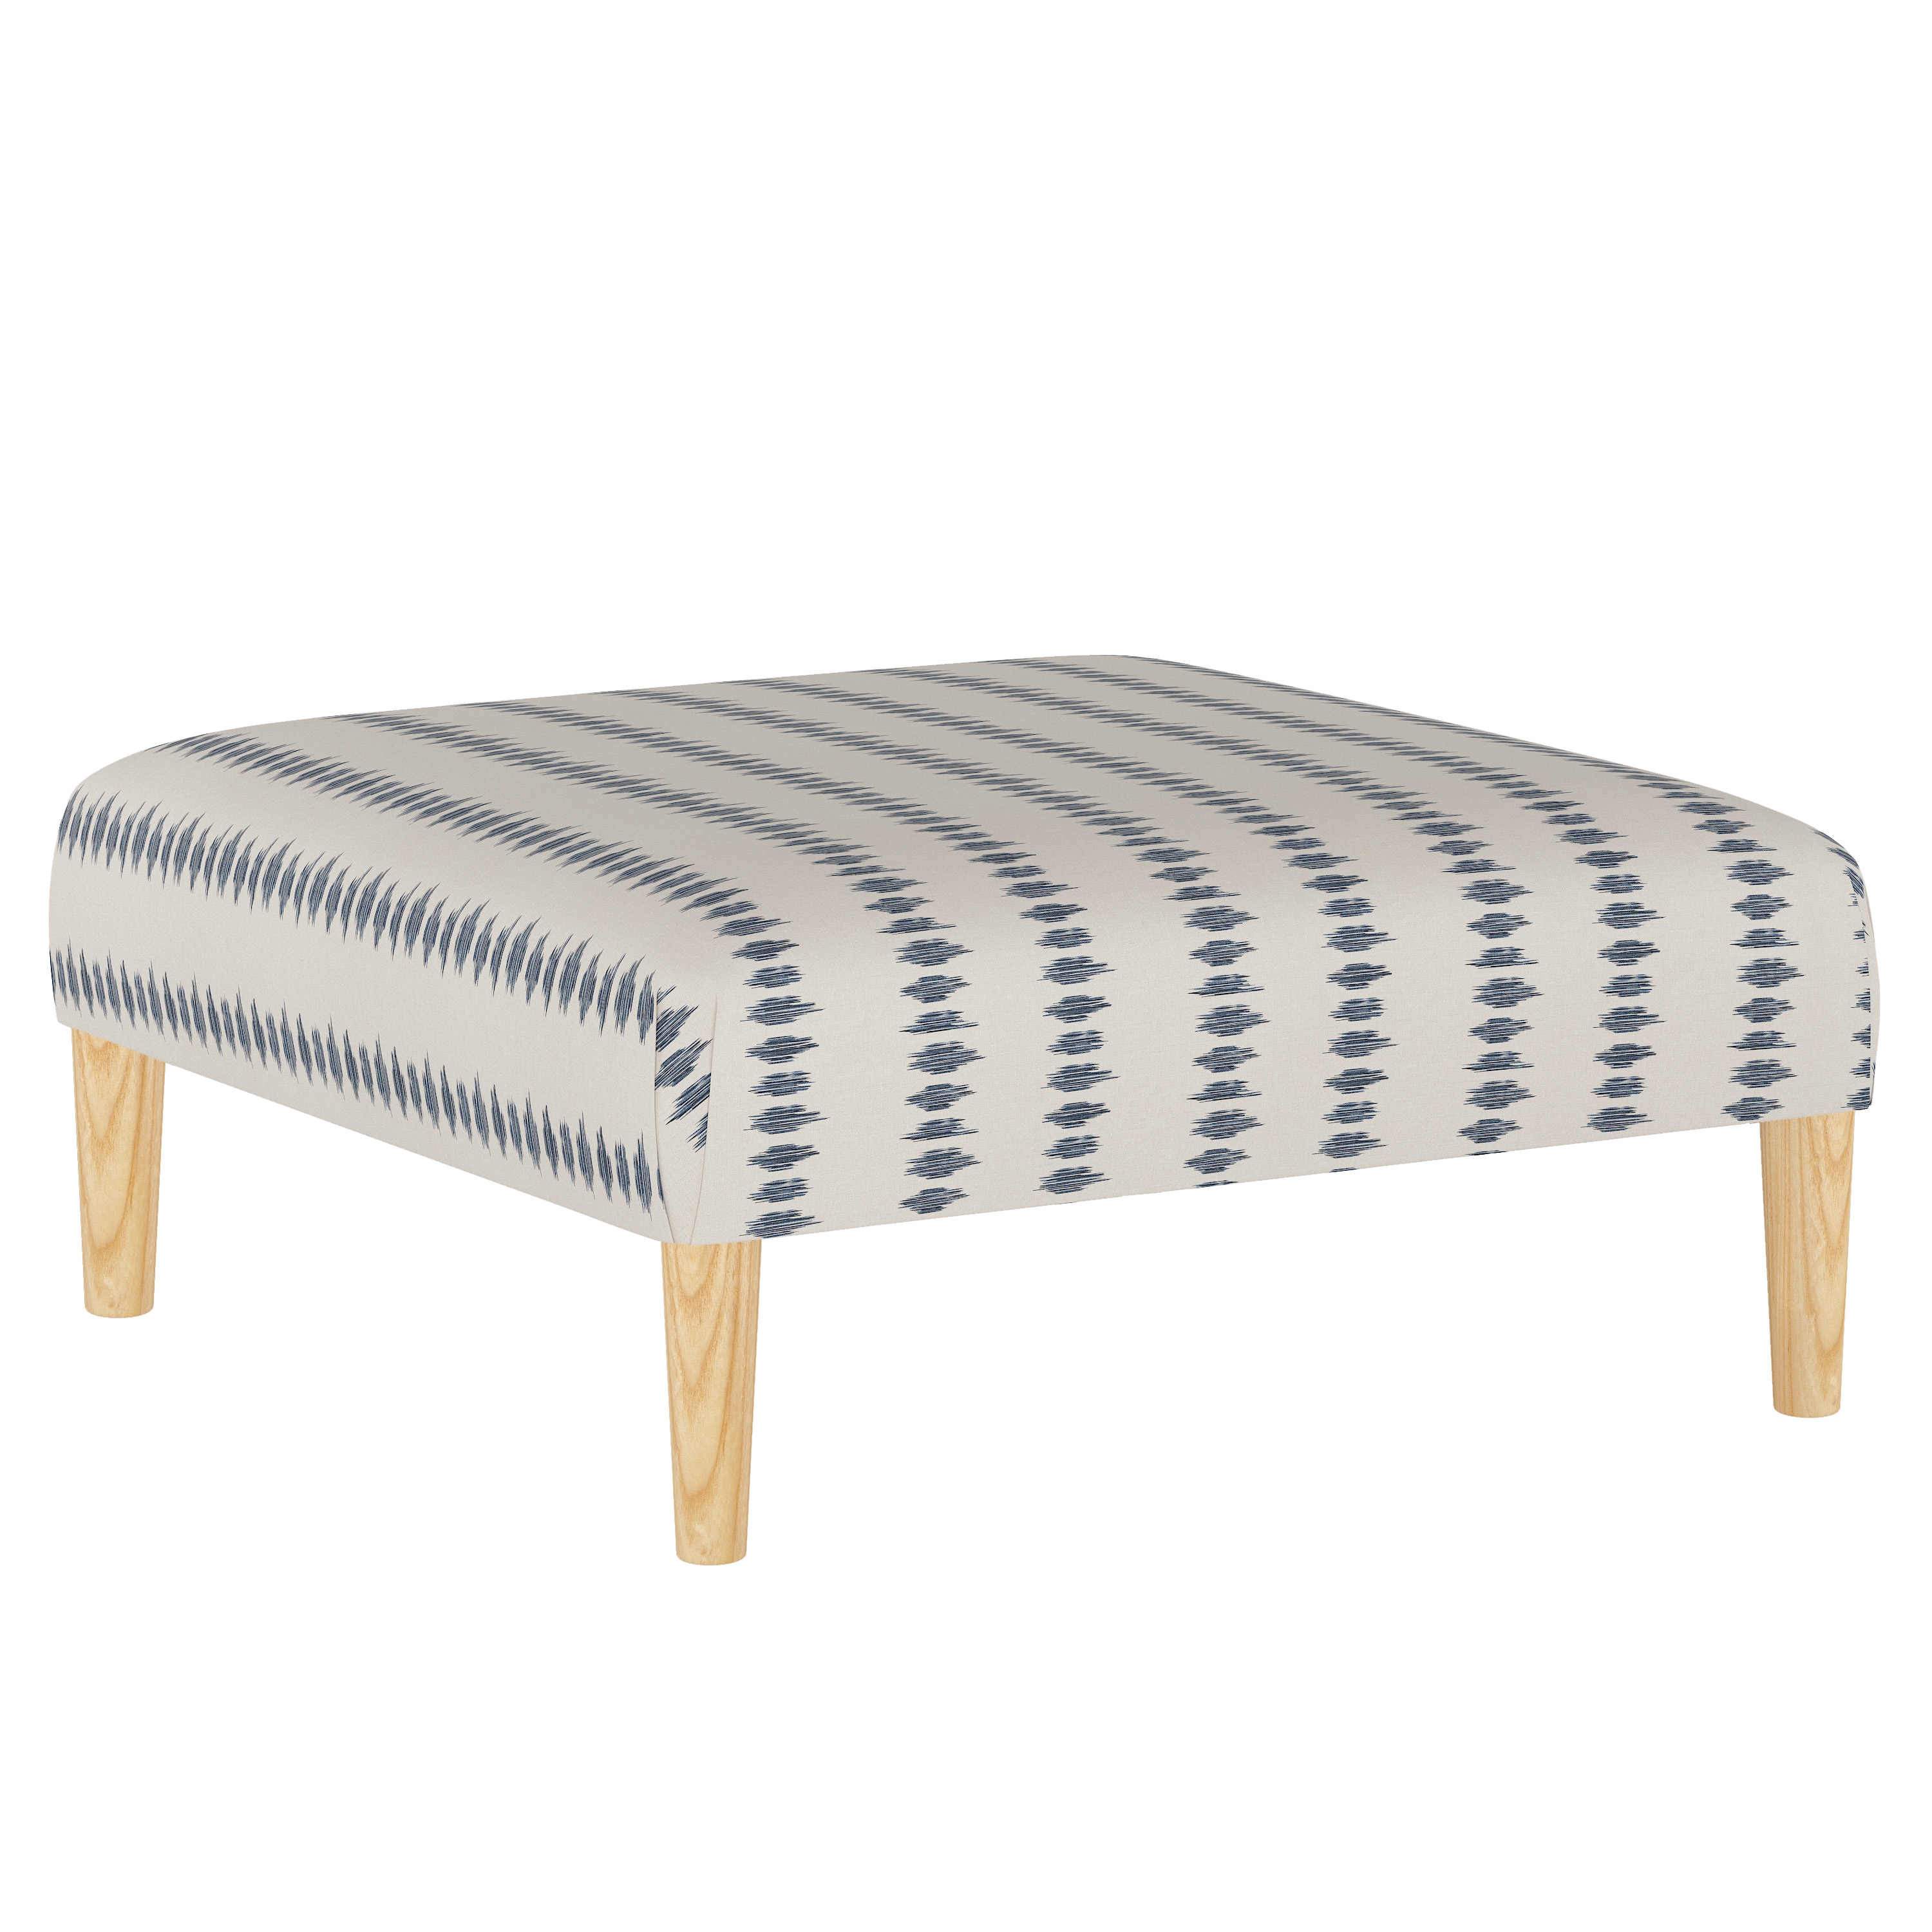 Algren Cocktail Ottoman with Cone Legs in Ikat Scribble Slate Oga - Image 0